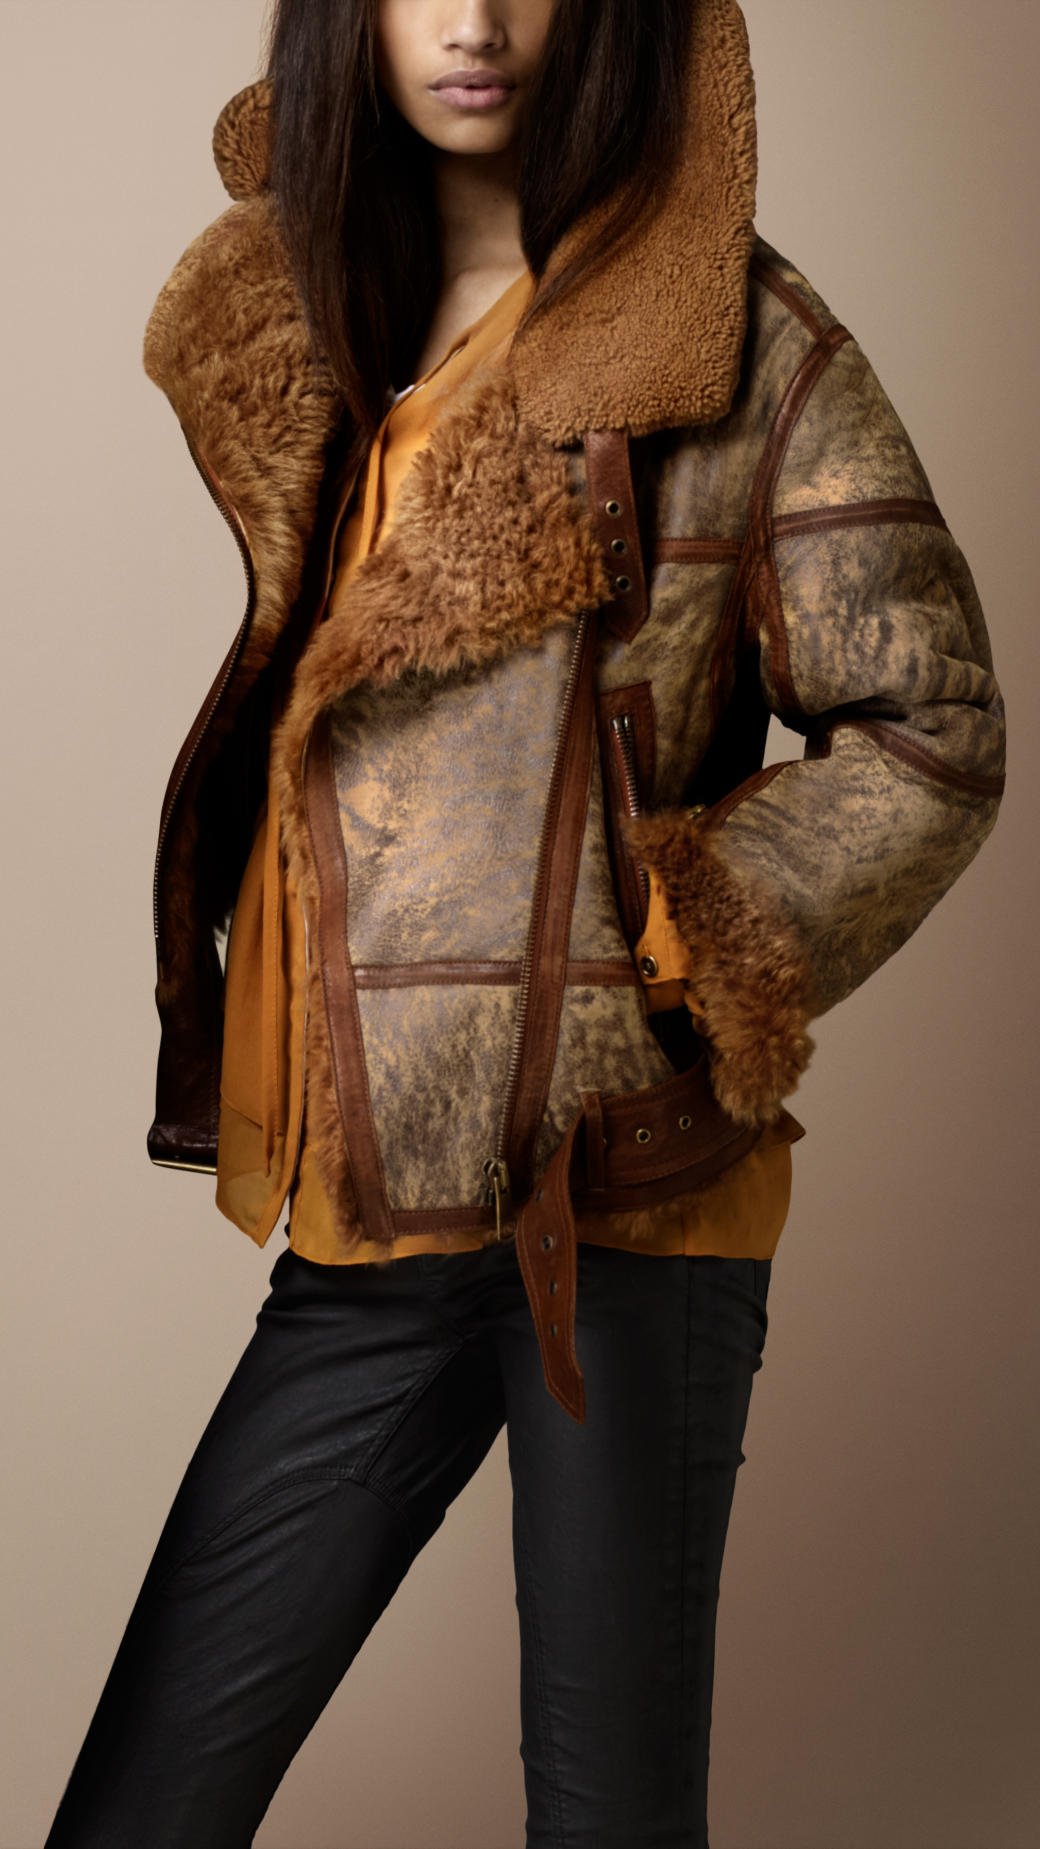 Lyst - Burberry brit Shearling Aviator Jacket in Brown